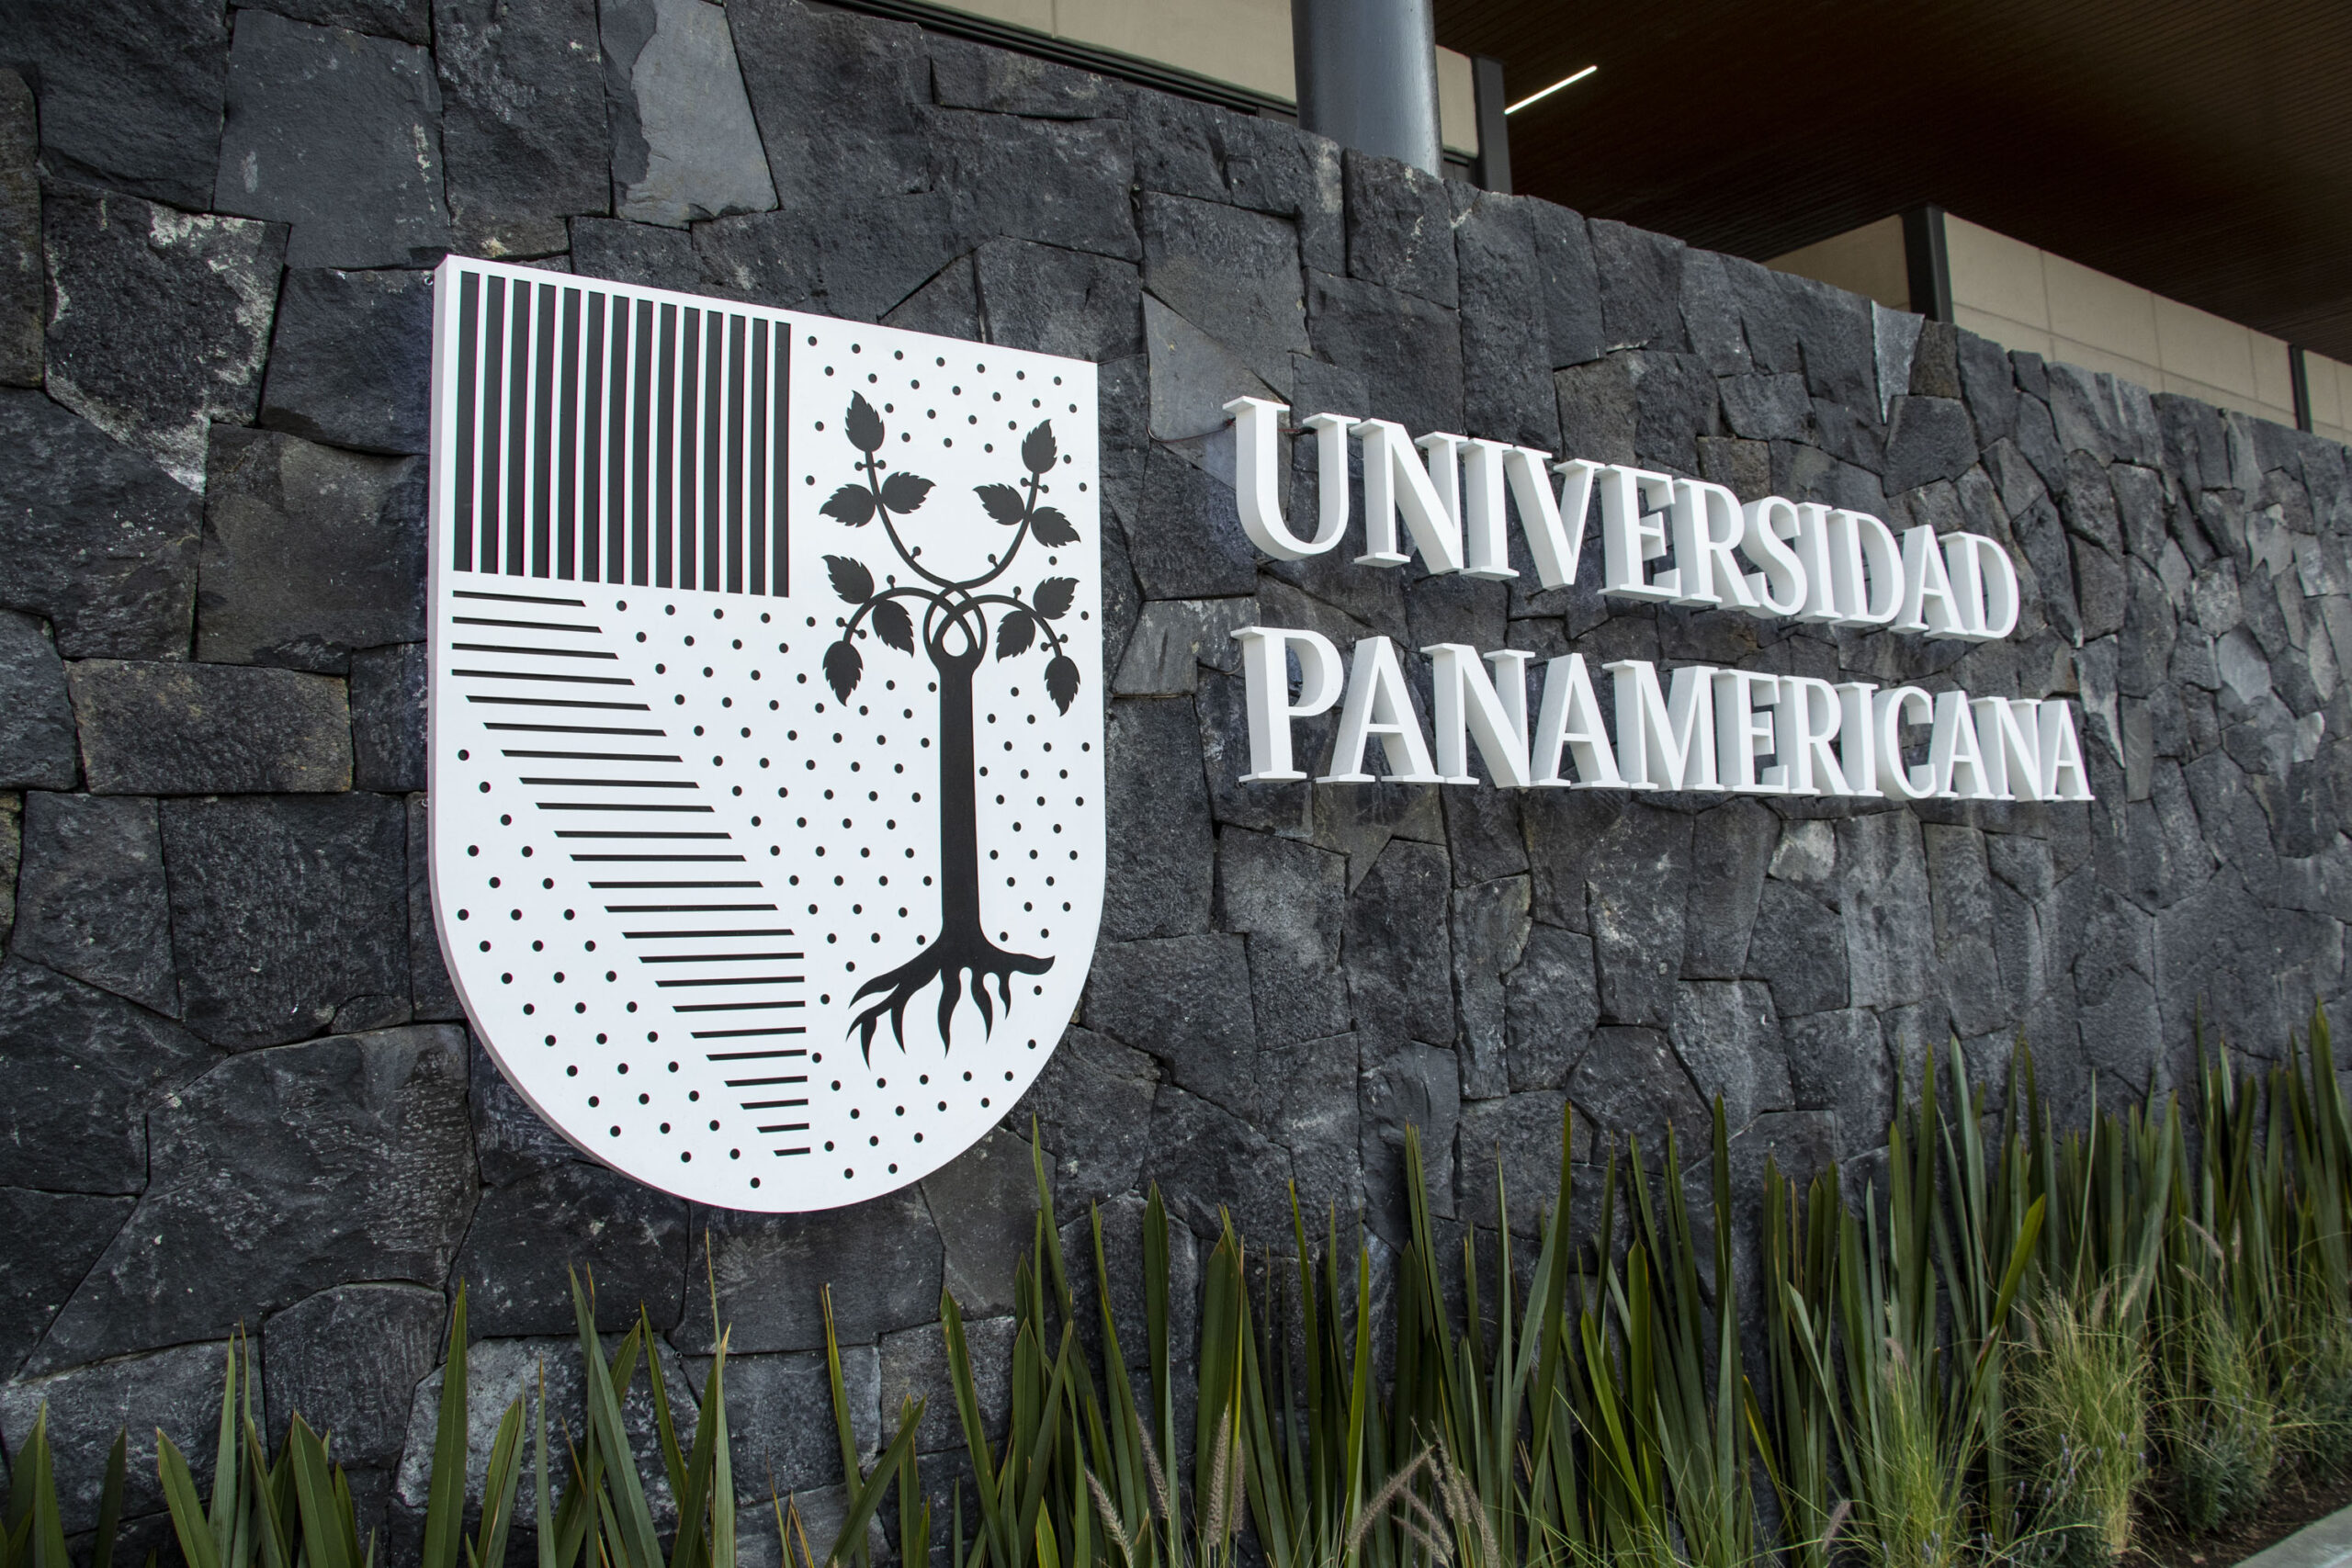 UP SECOND BEST PRIVATE UNIVERSITY IN MEXICO: QS WORLD UNIVERSITY RANKING